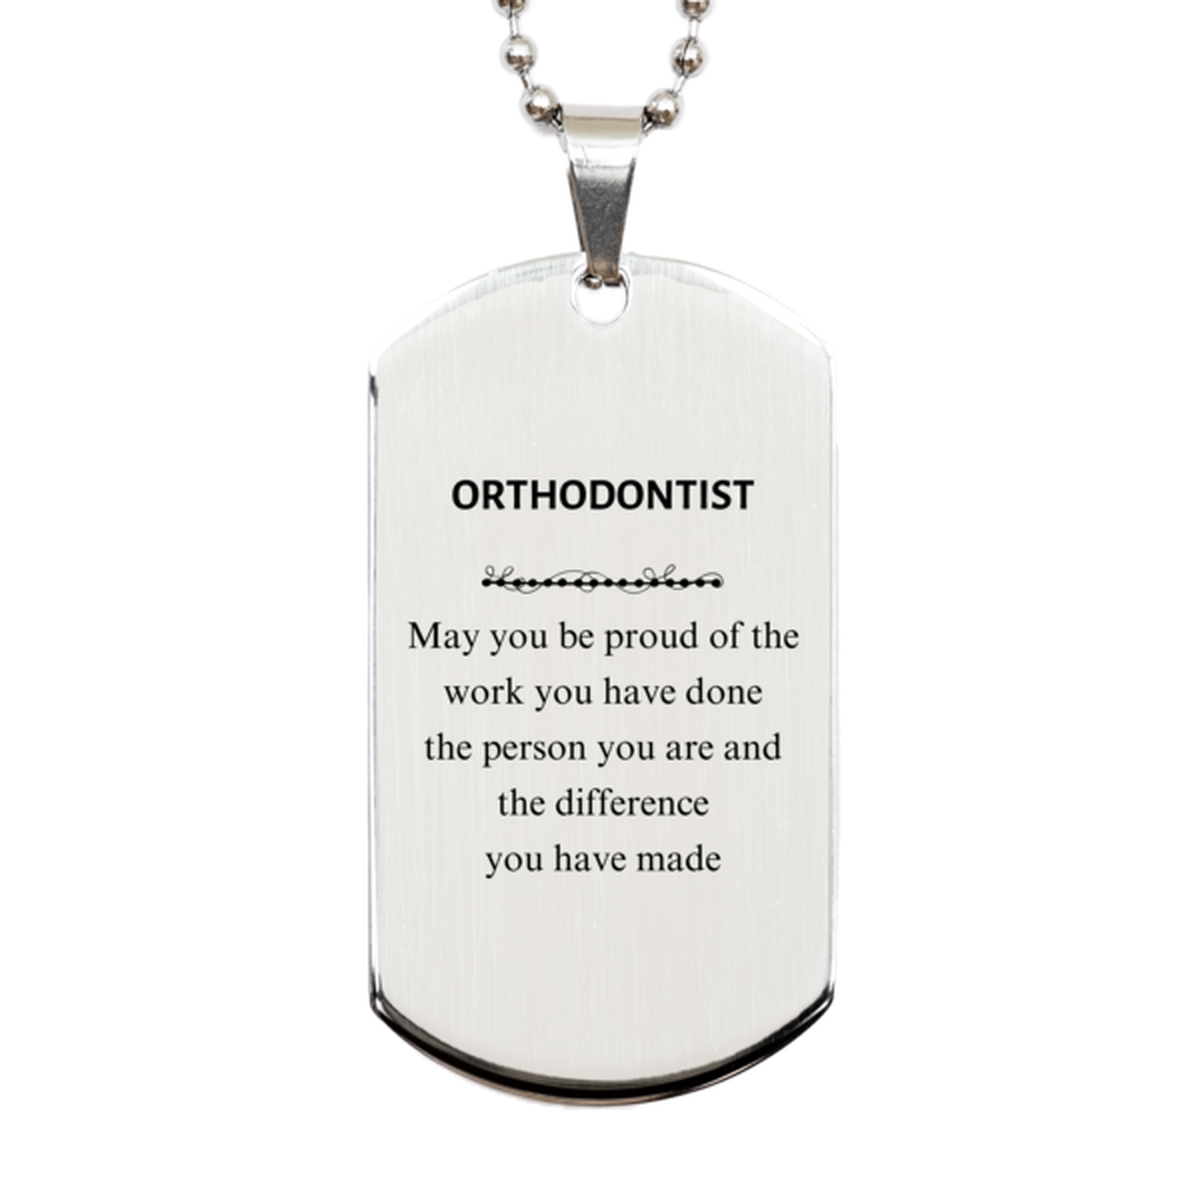 Orthodontist May you be proud of the work you have done, Retirement Orthodontist Silver Dog Tag for Colleague Appreciation Gifts Amazing for Orthodontist